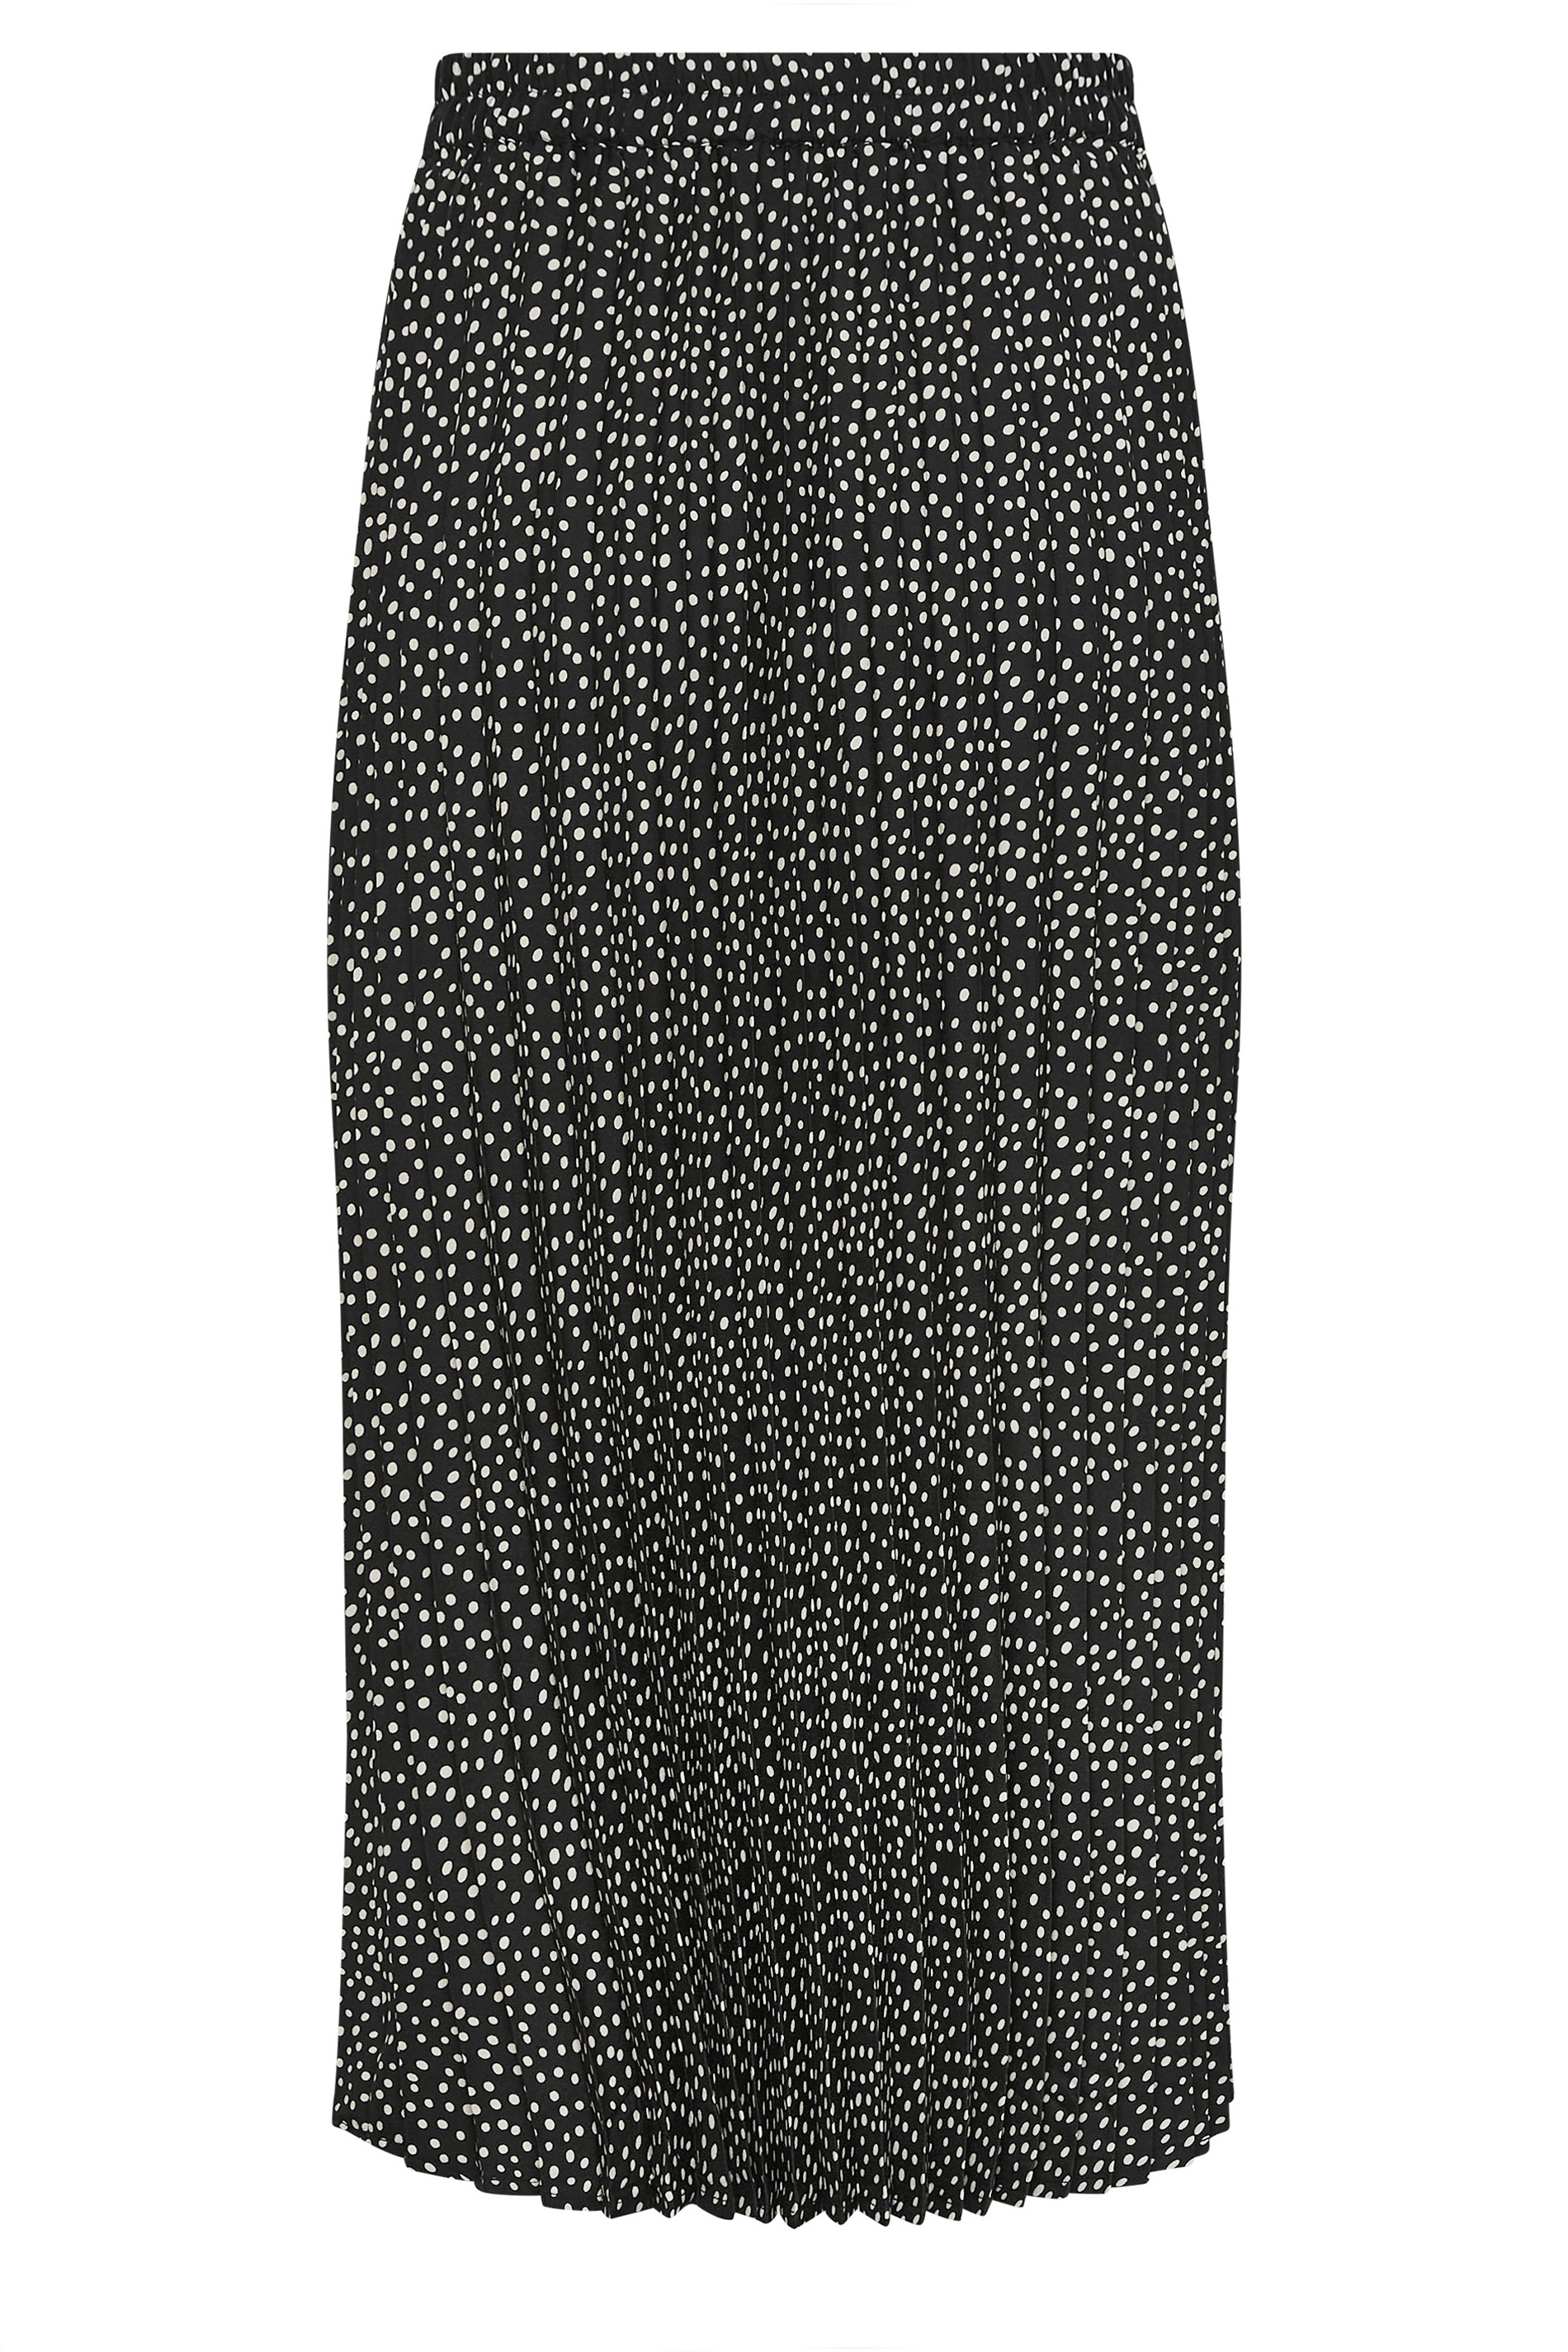 YOURS PETITE Plus Size Black Spot Print Pleated Skirt | Yours Clothing 2